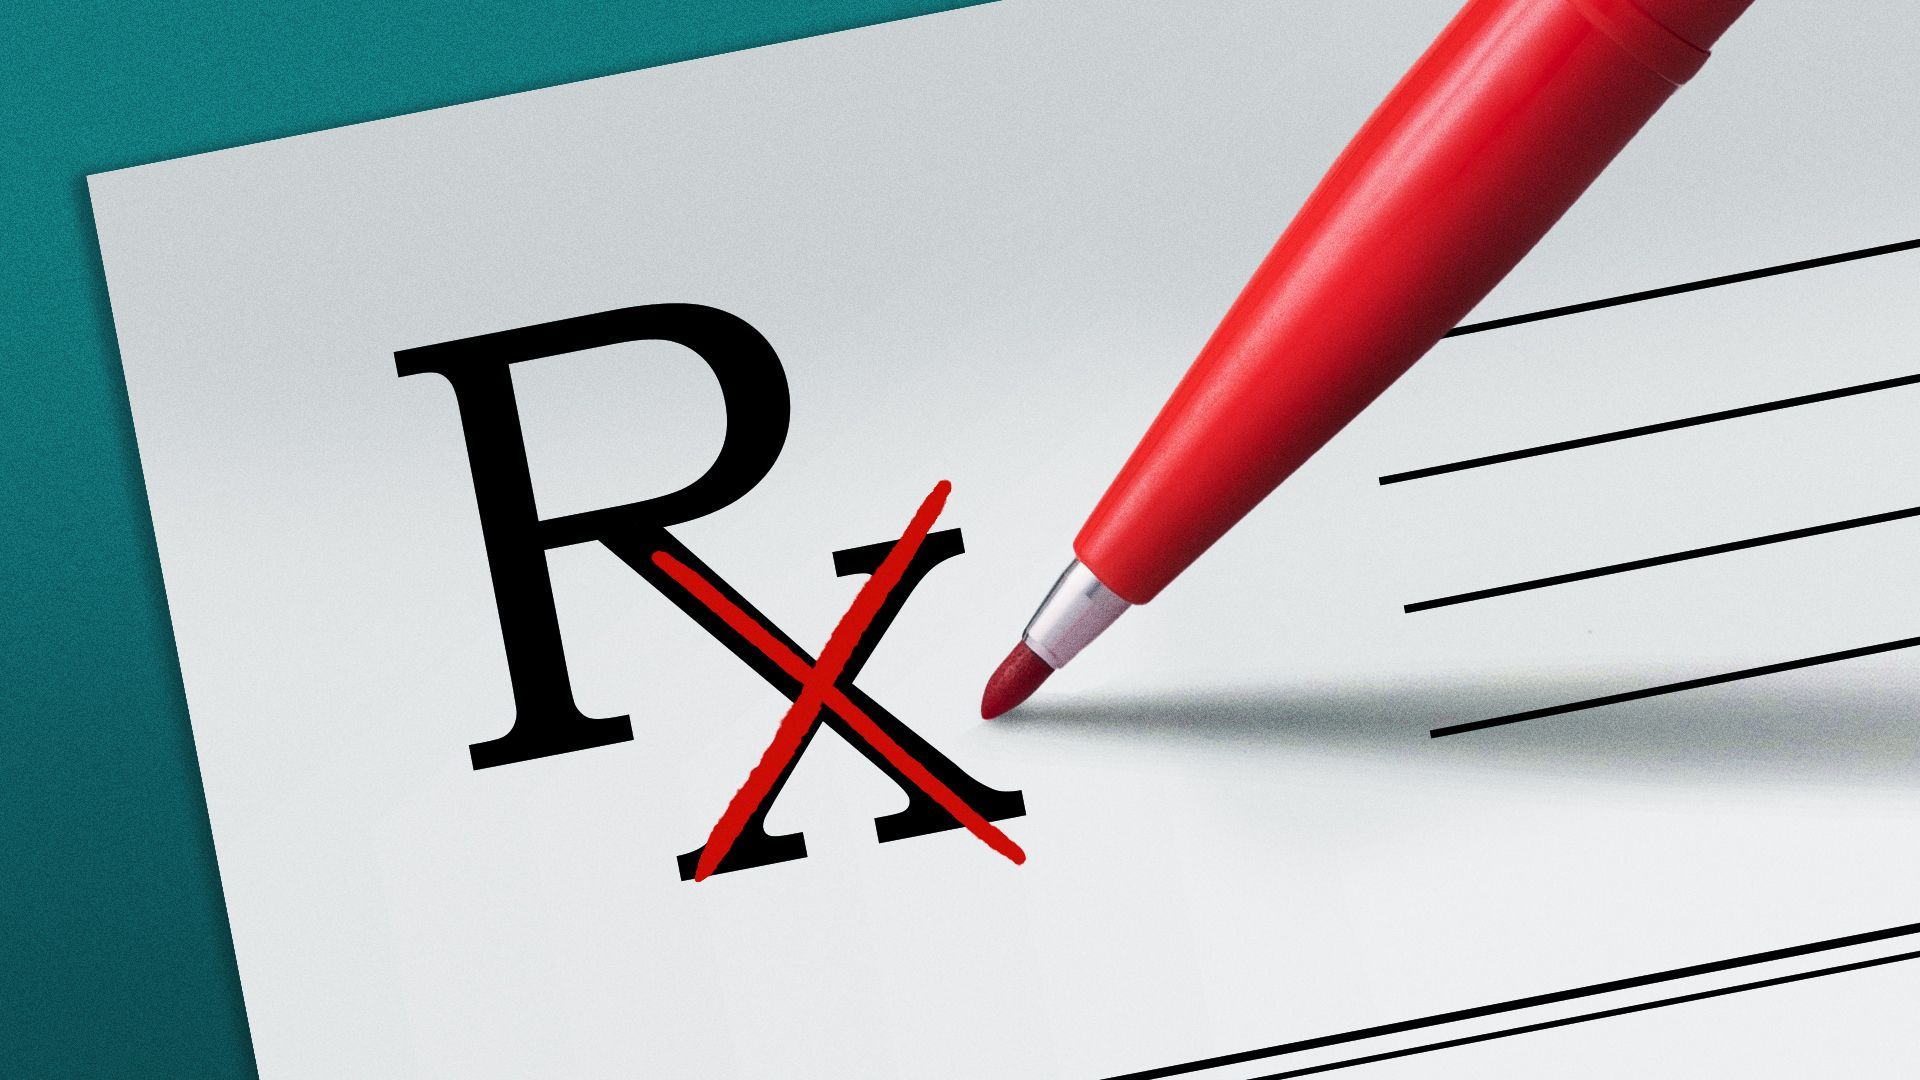 Illustration of a pen crossing out the "X" in the prescription symbol.